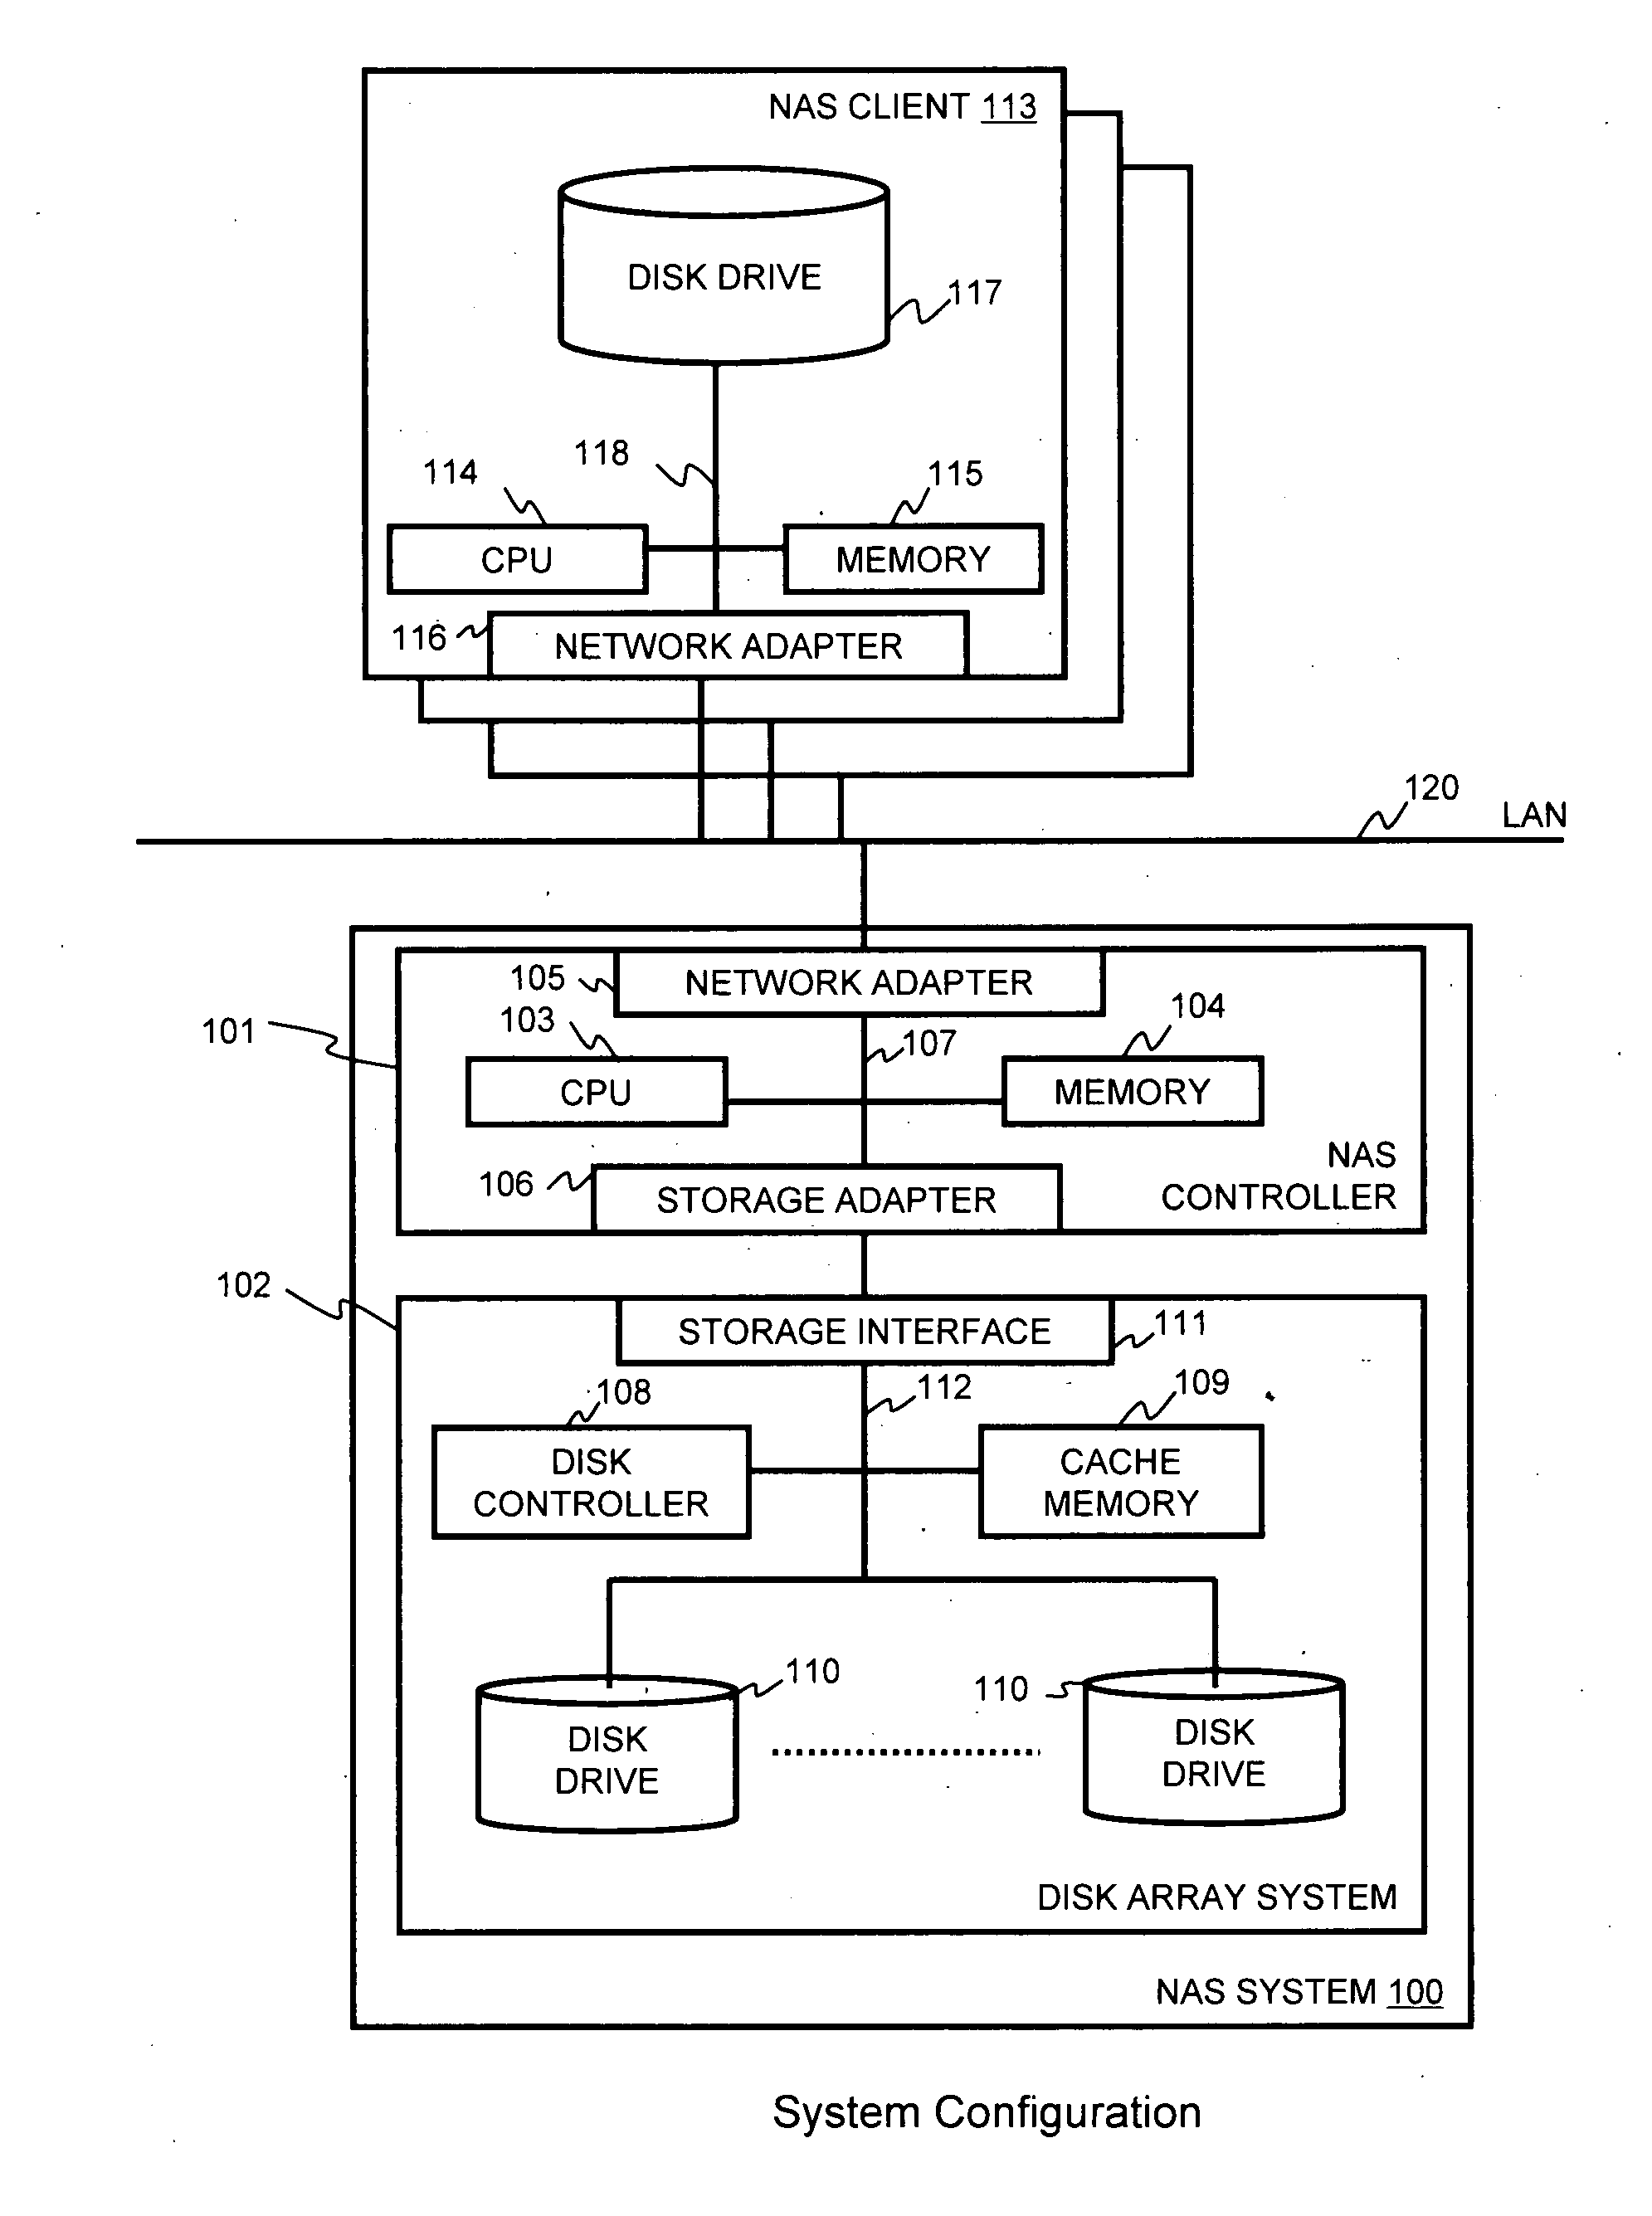 Method and apparatus for enabling a NAS system to utilize thin provisioning